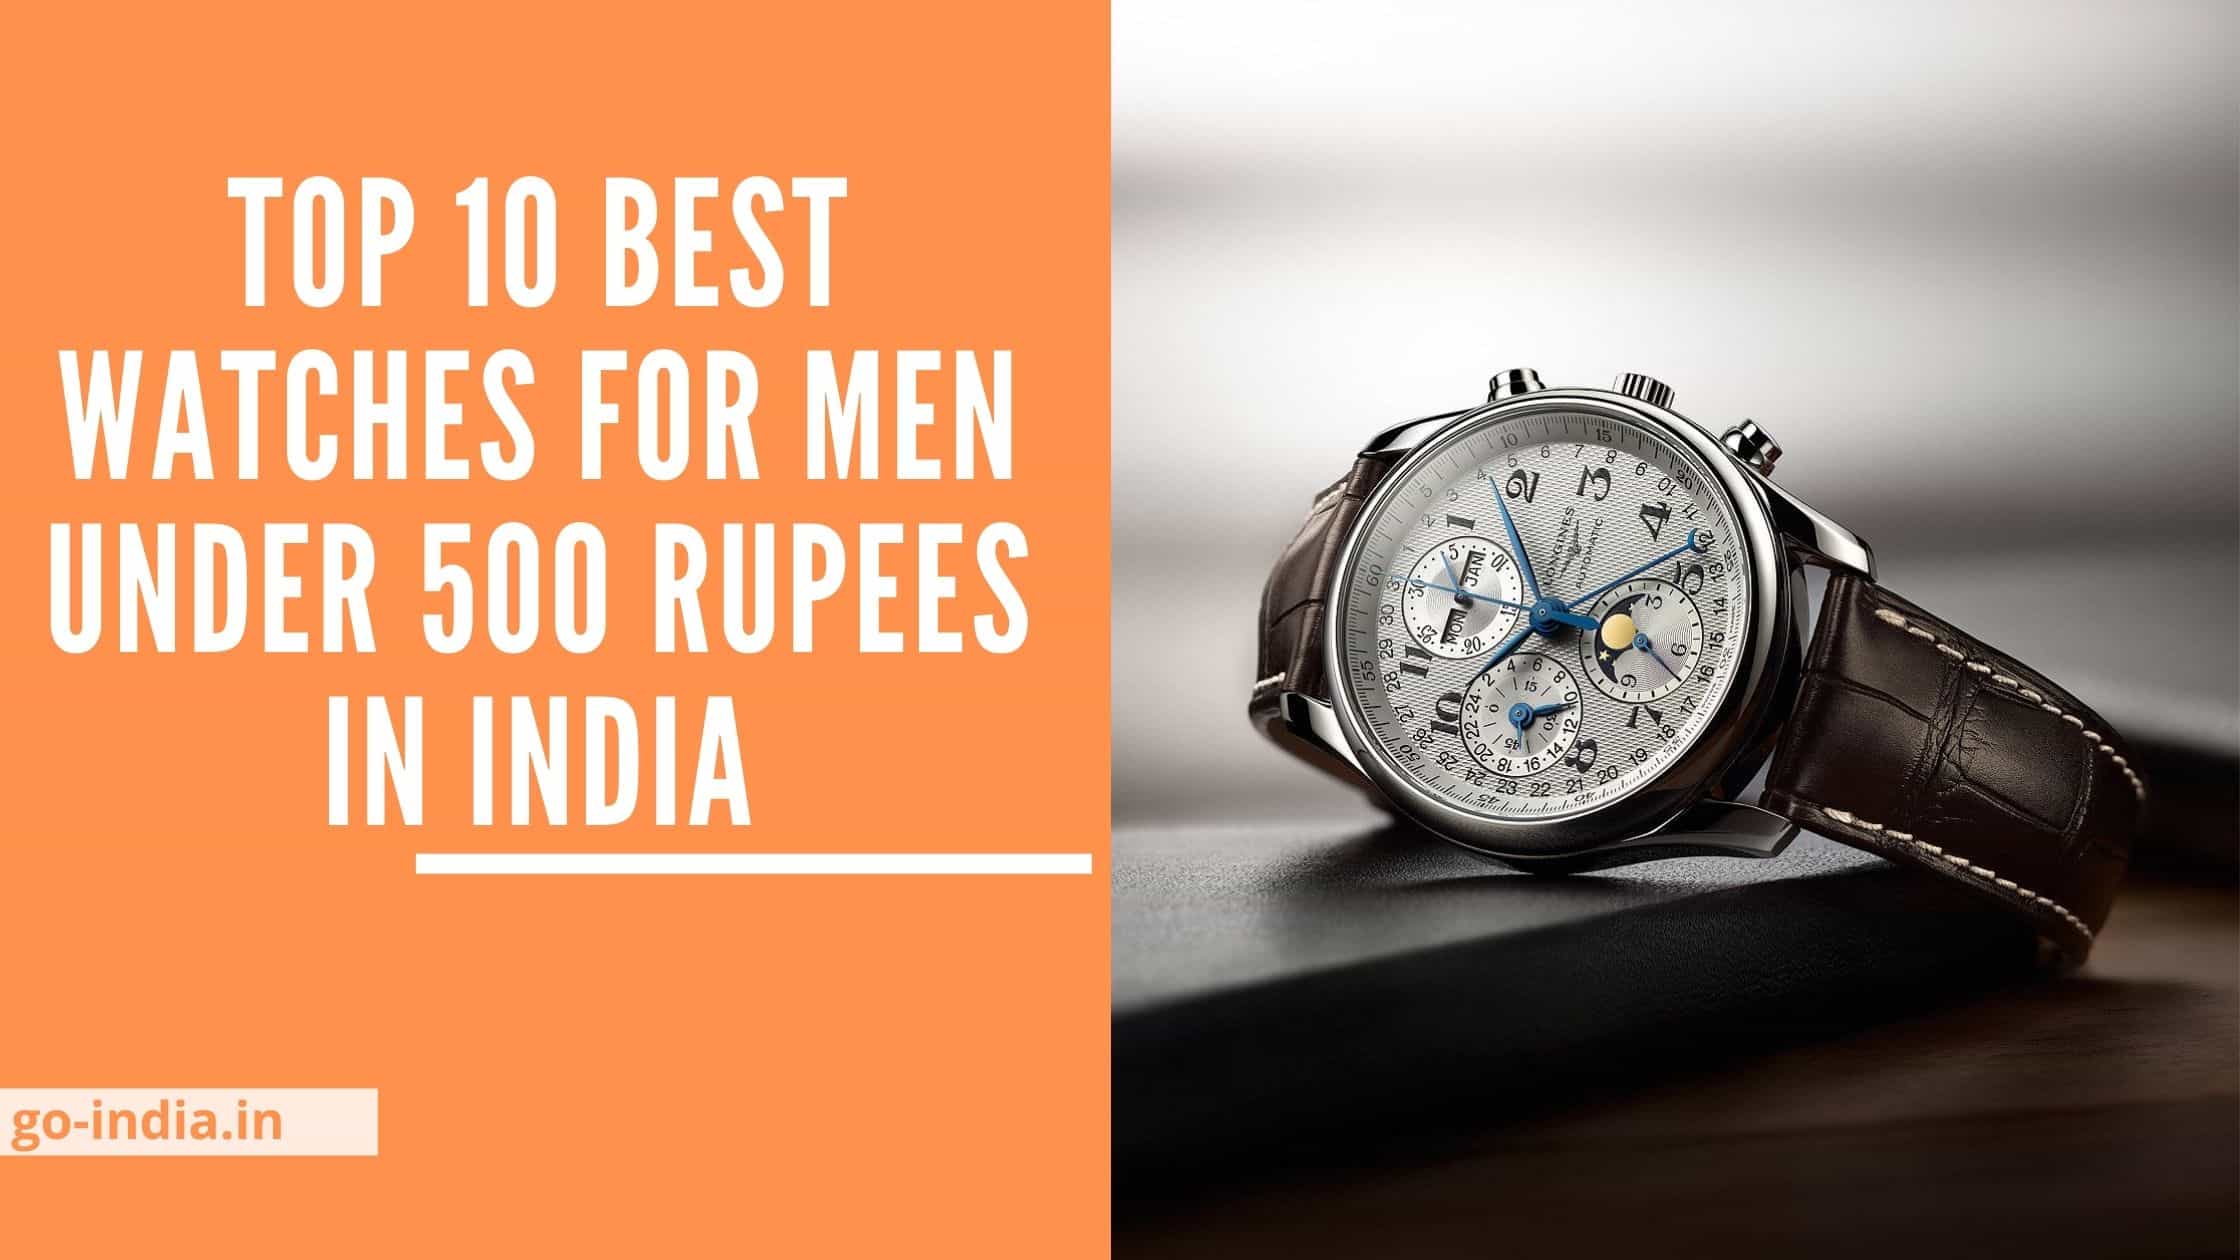 Top 10 Best Watches For Men Under 500 Rupees in India 2022